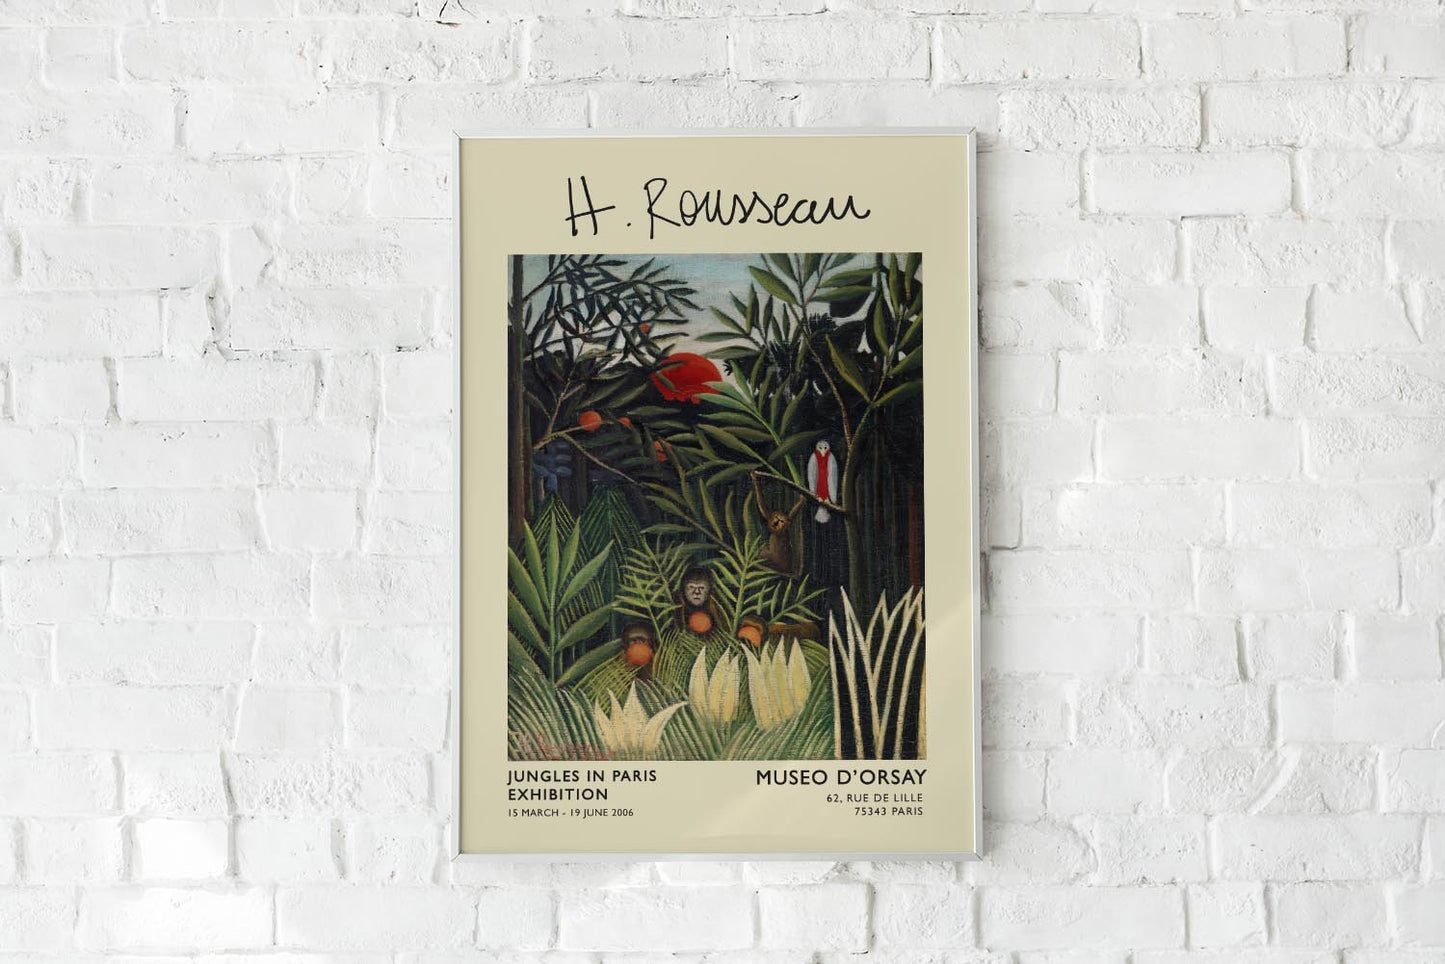 Monkeys and Parrot Rousseau Exhibition Poster